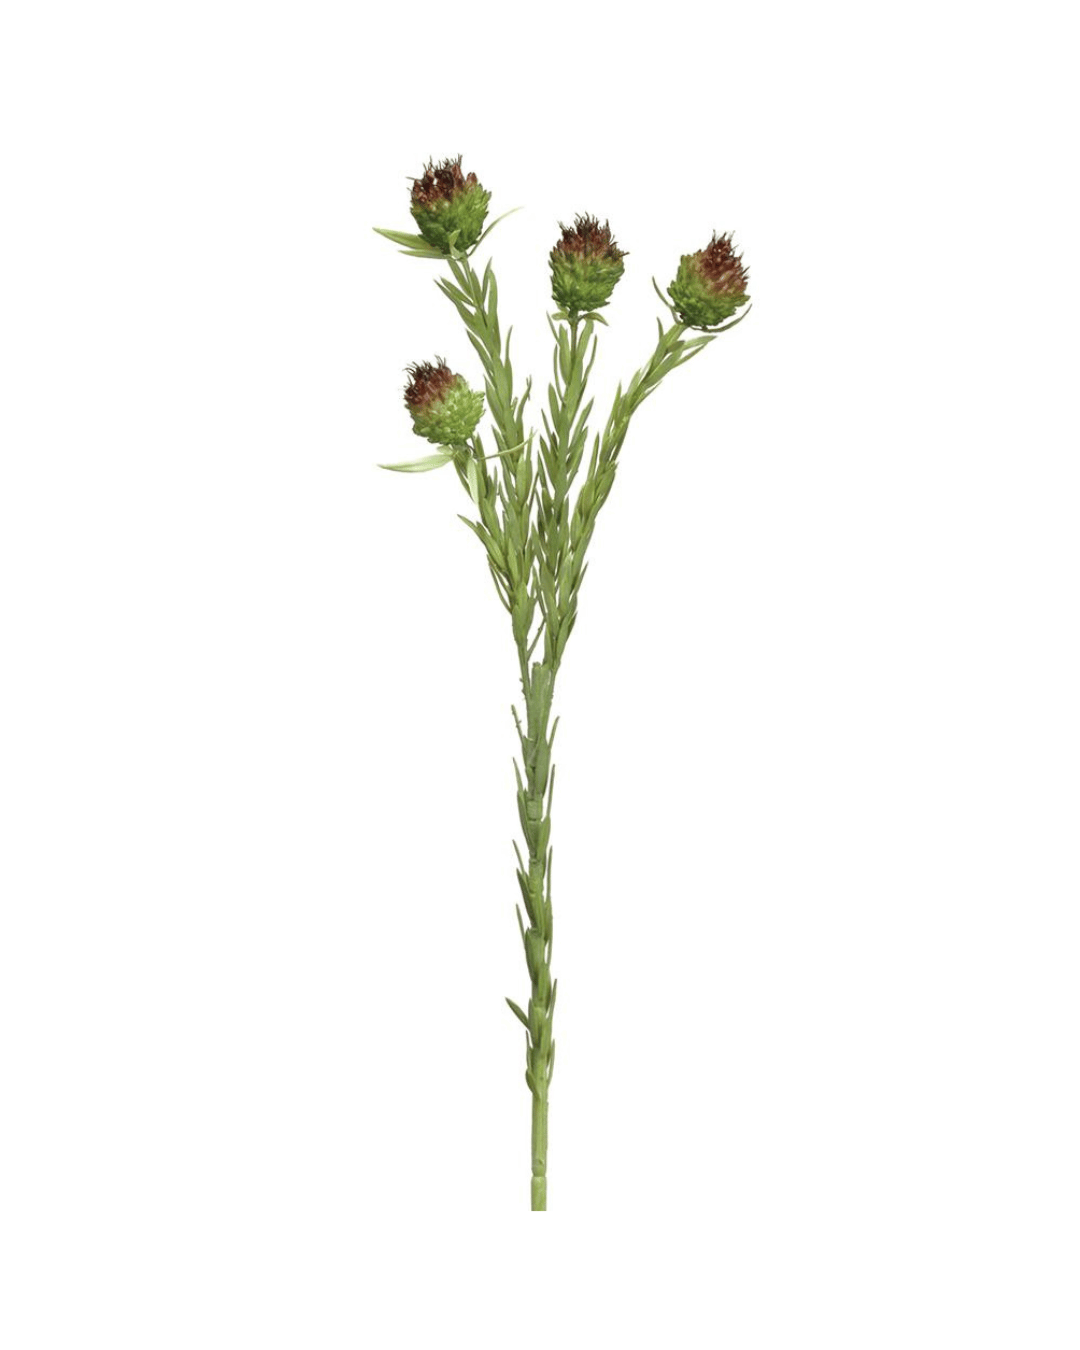 Illustration of a single green plant stem with several leaves and three brownish spiky flower buds at the top, isolated on a white background in Scottsdale, Arizona featuring the AllState Floral And Craft 22" Mini aluminum spray.